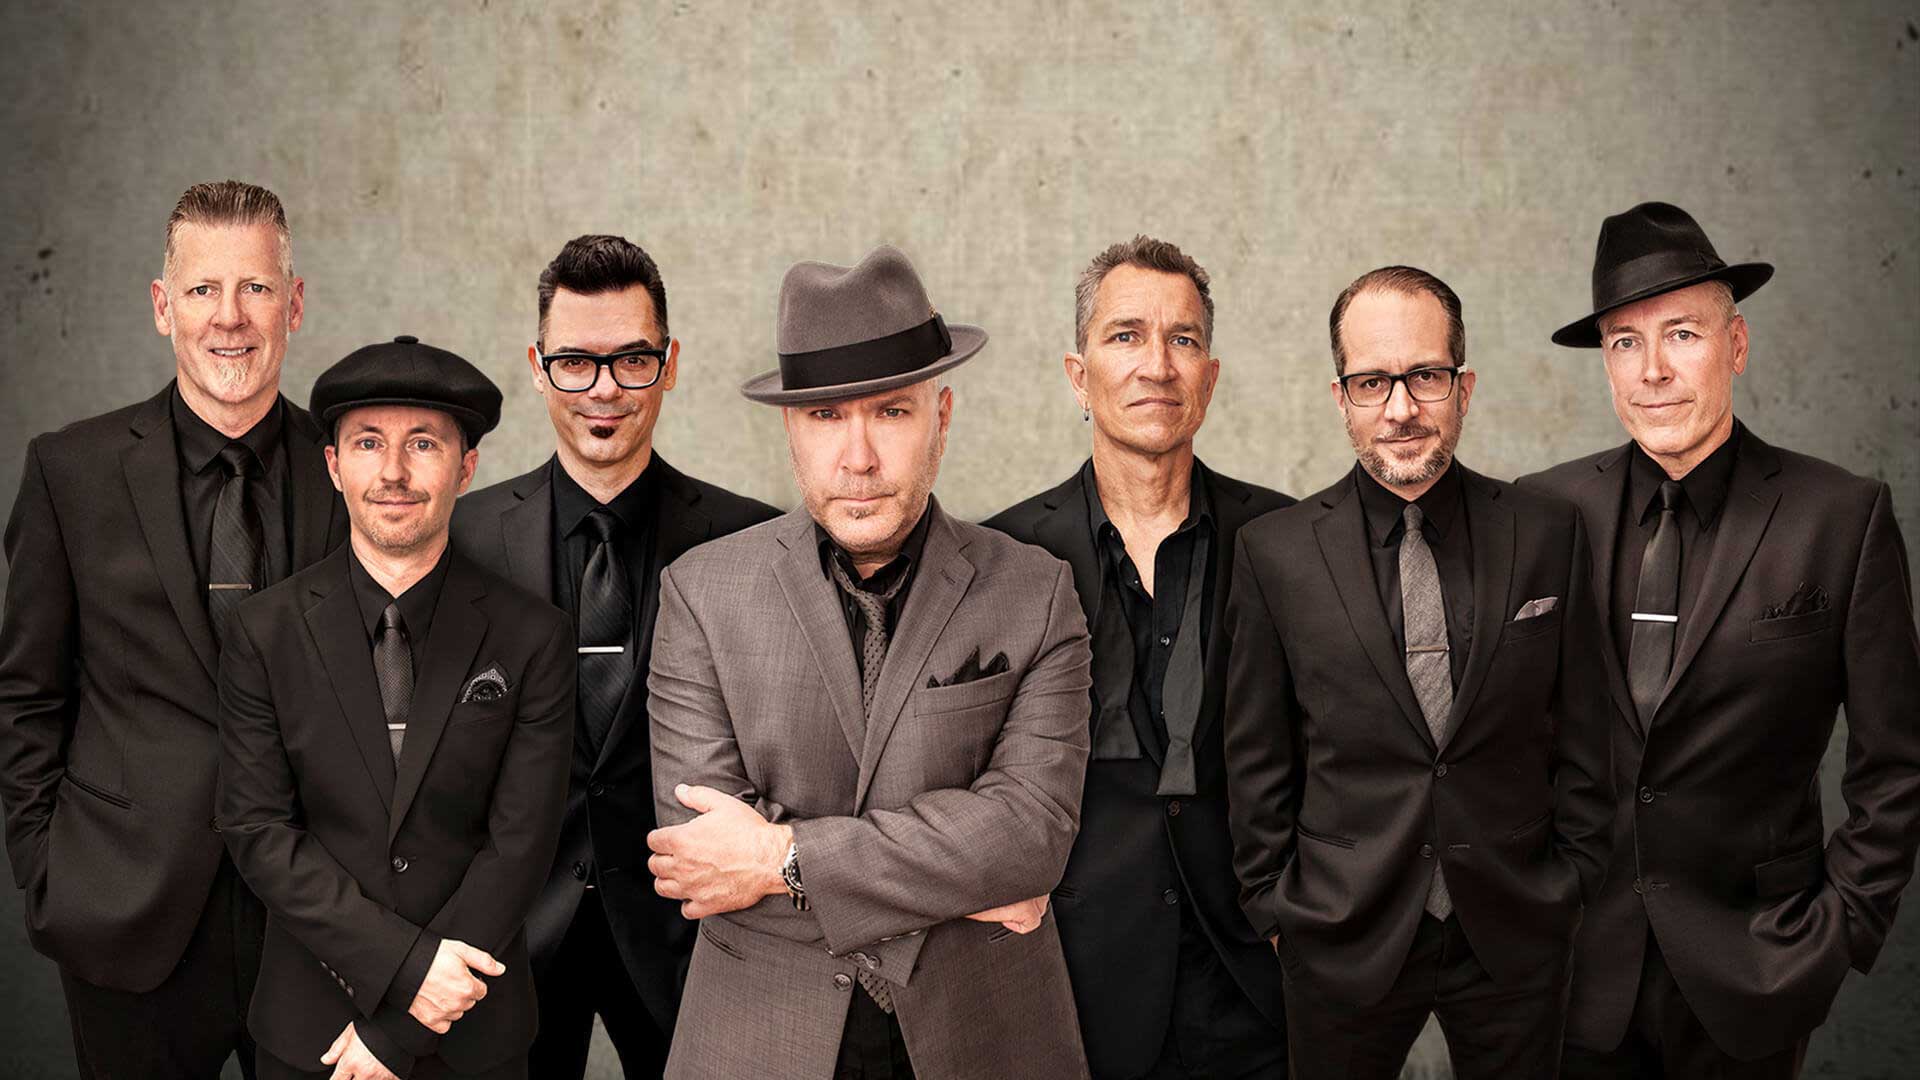 Dressed in suits and fedoras, seven members of Big Bad Voodoo Daddy prepare to unleash big band sound at the Paramount.